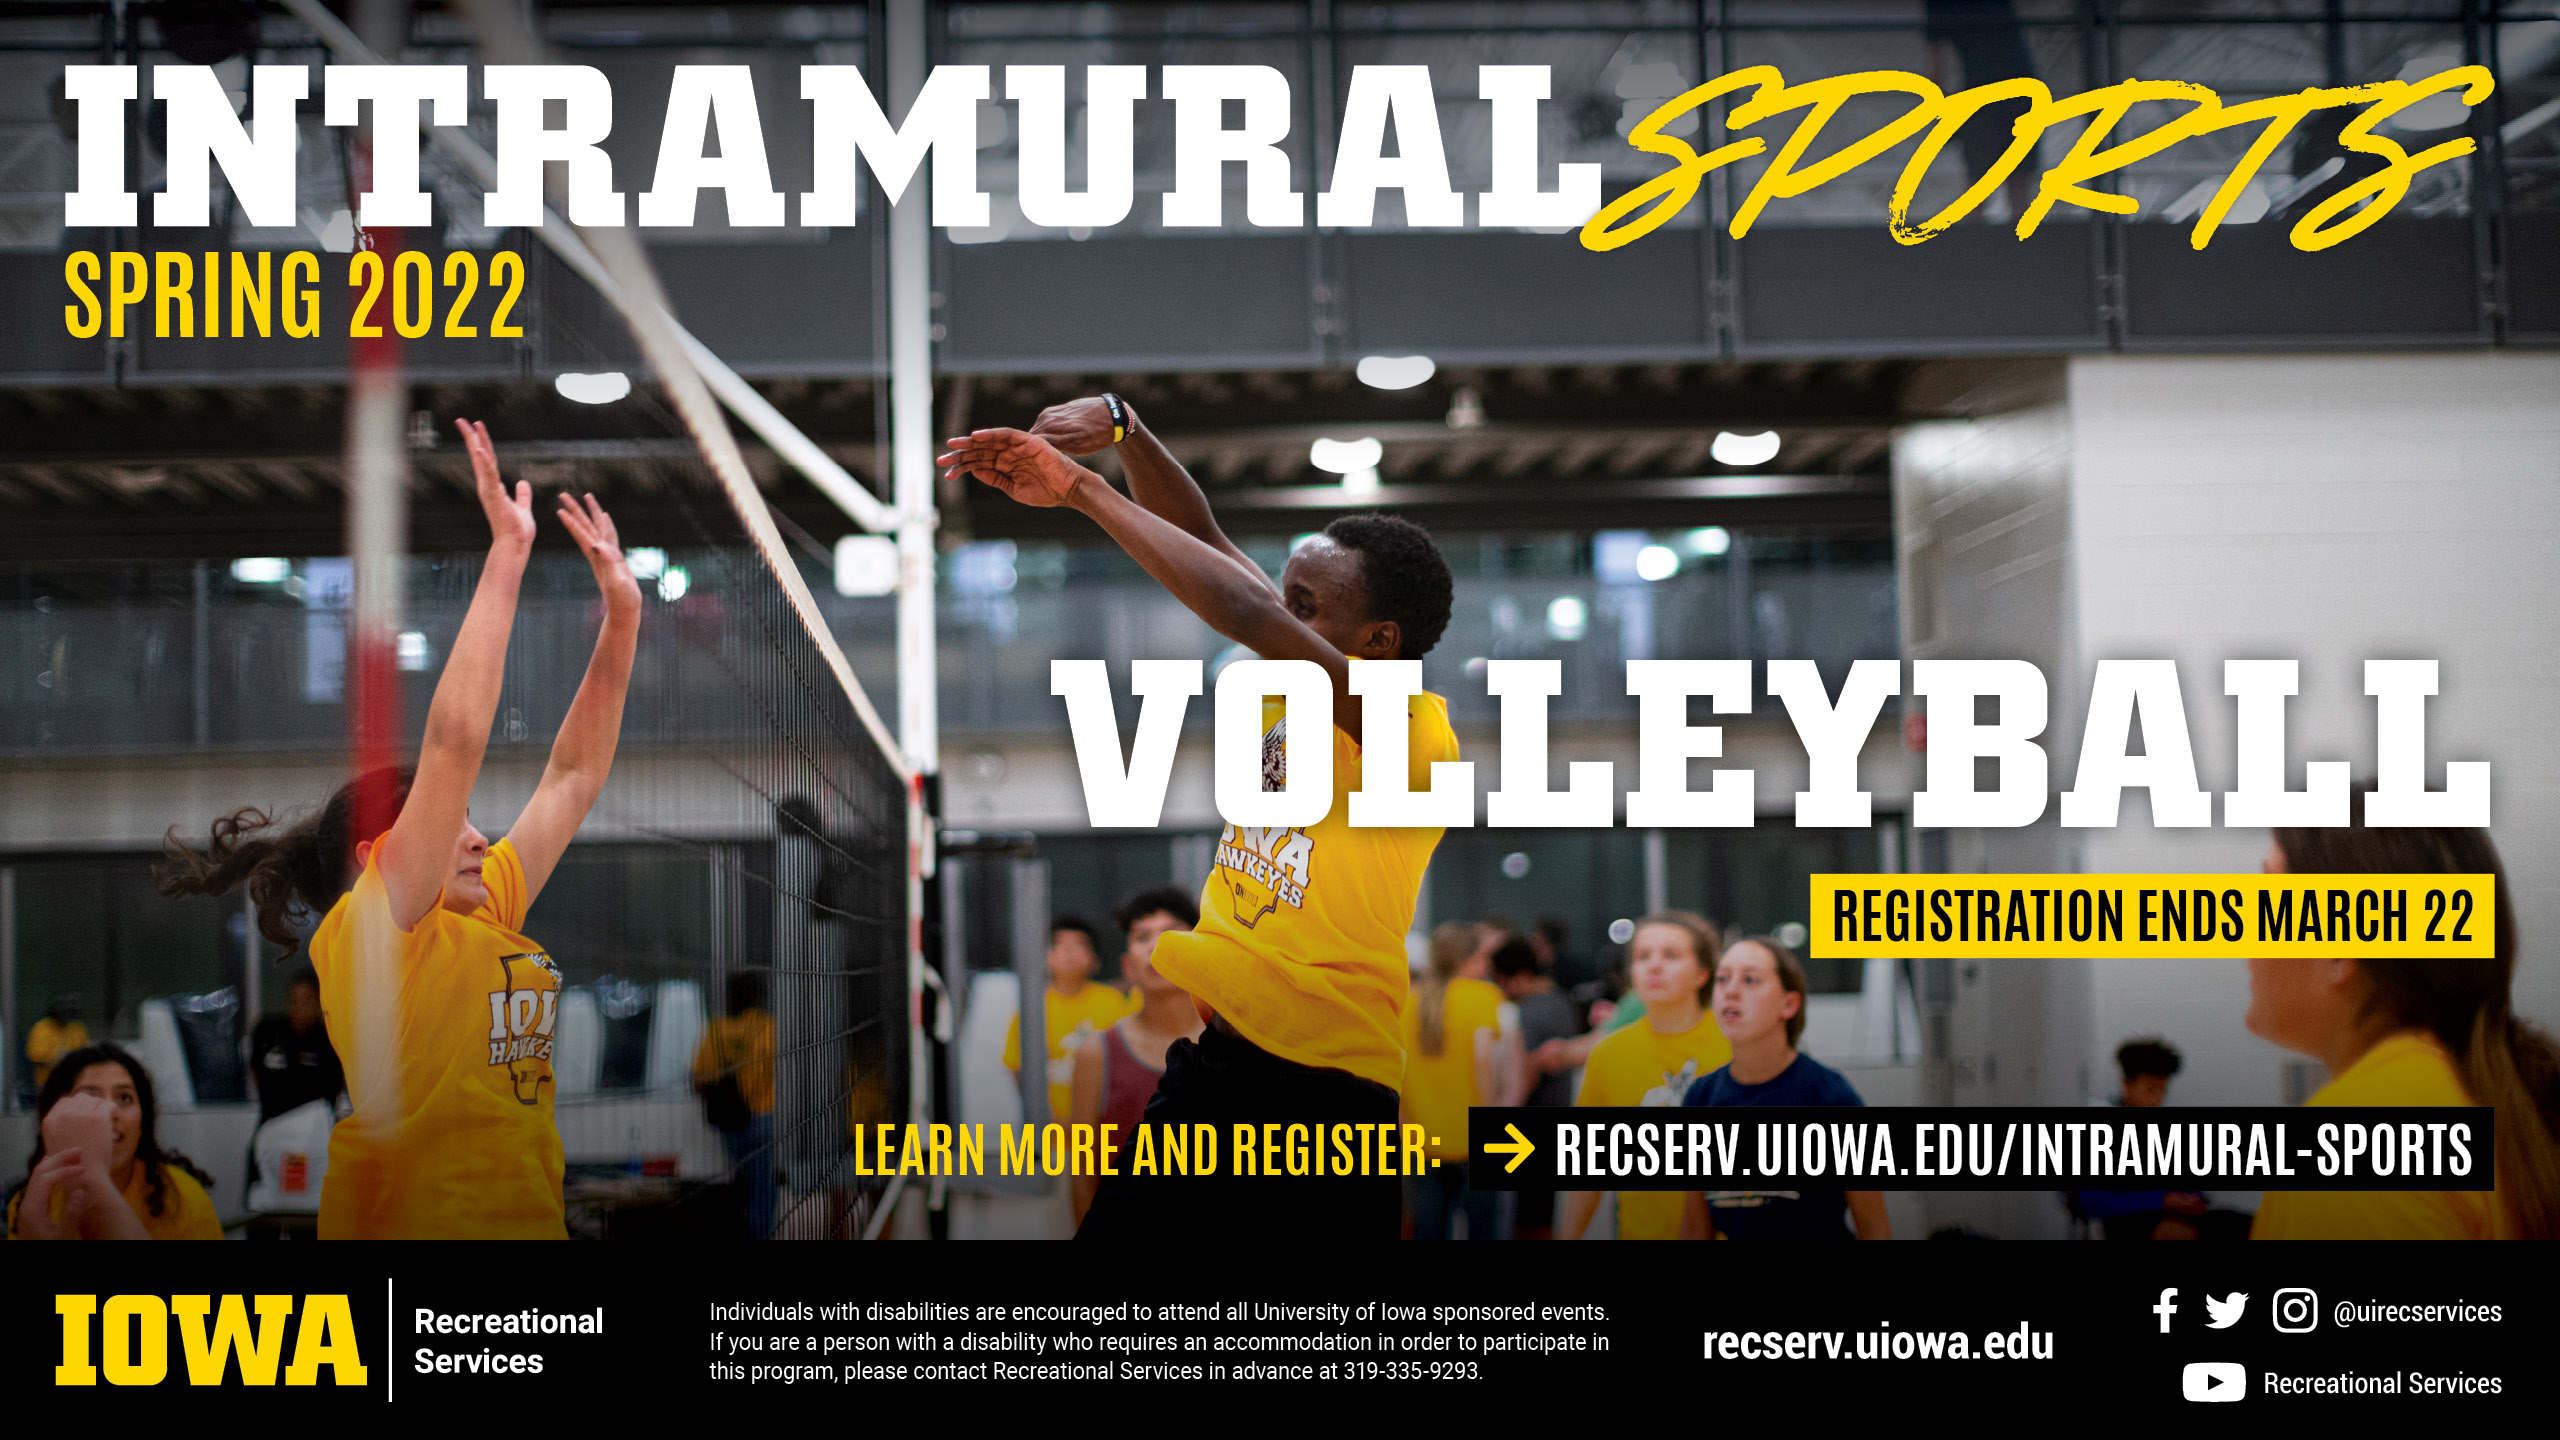 Intramural Sports Spring 2022 Volleyball Registration ends March 22 learn more and register at: recserv.uiowa.edu/intramural-sports